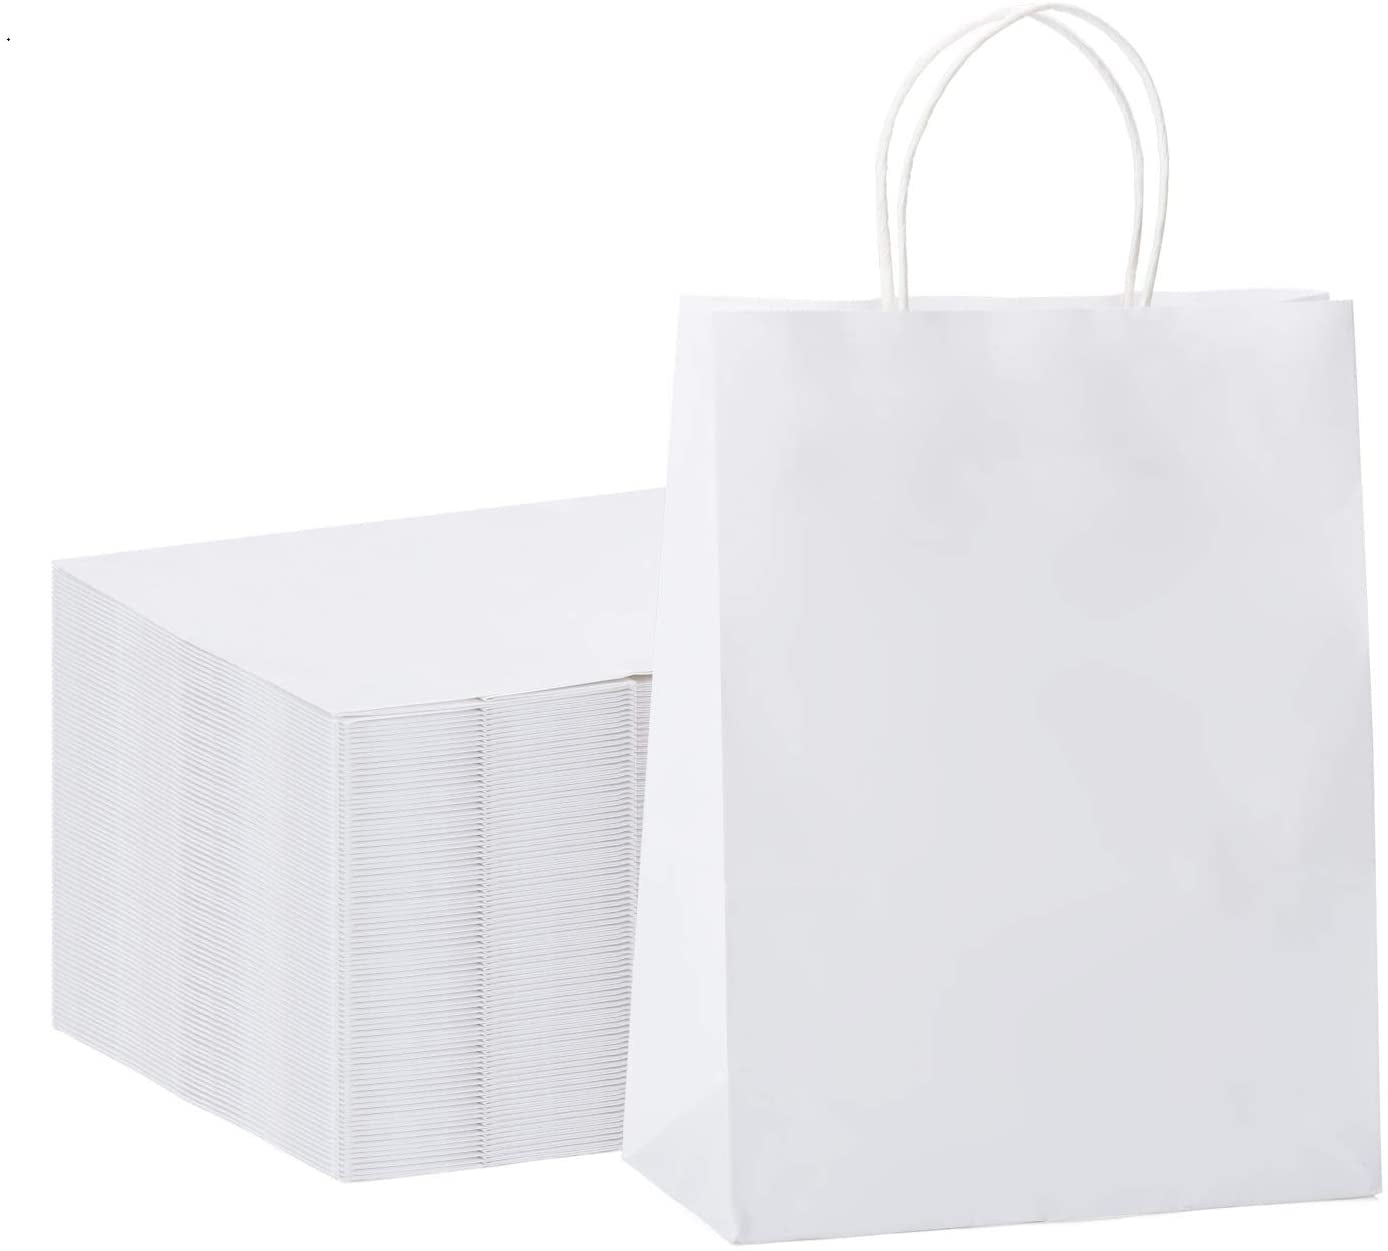 4.3 White Tengcong Kraft Paper Bags Gift Bags with Handles Shopping Durable Reusable Merchandise Retail Bags 25Pcs 12.6 9.8